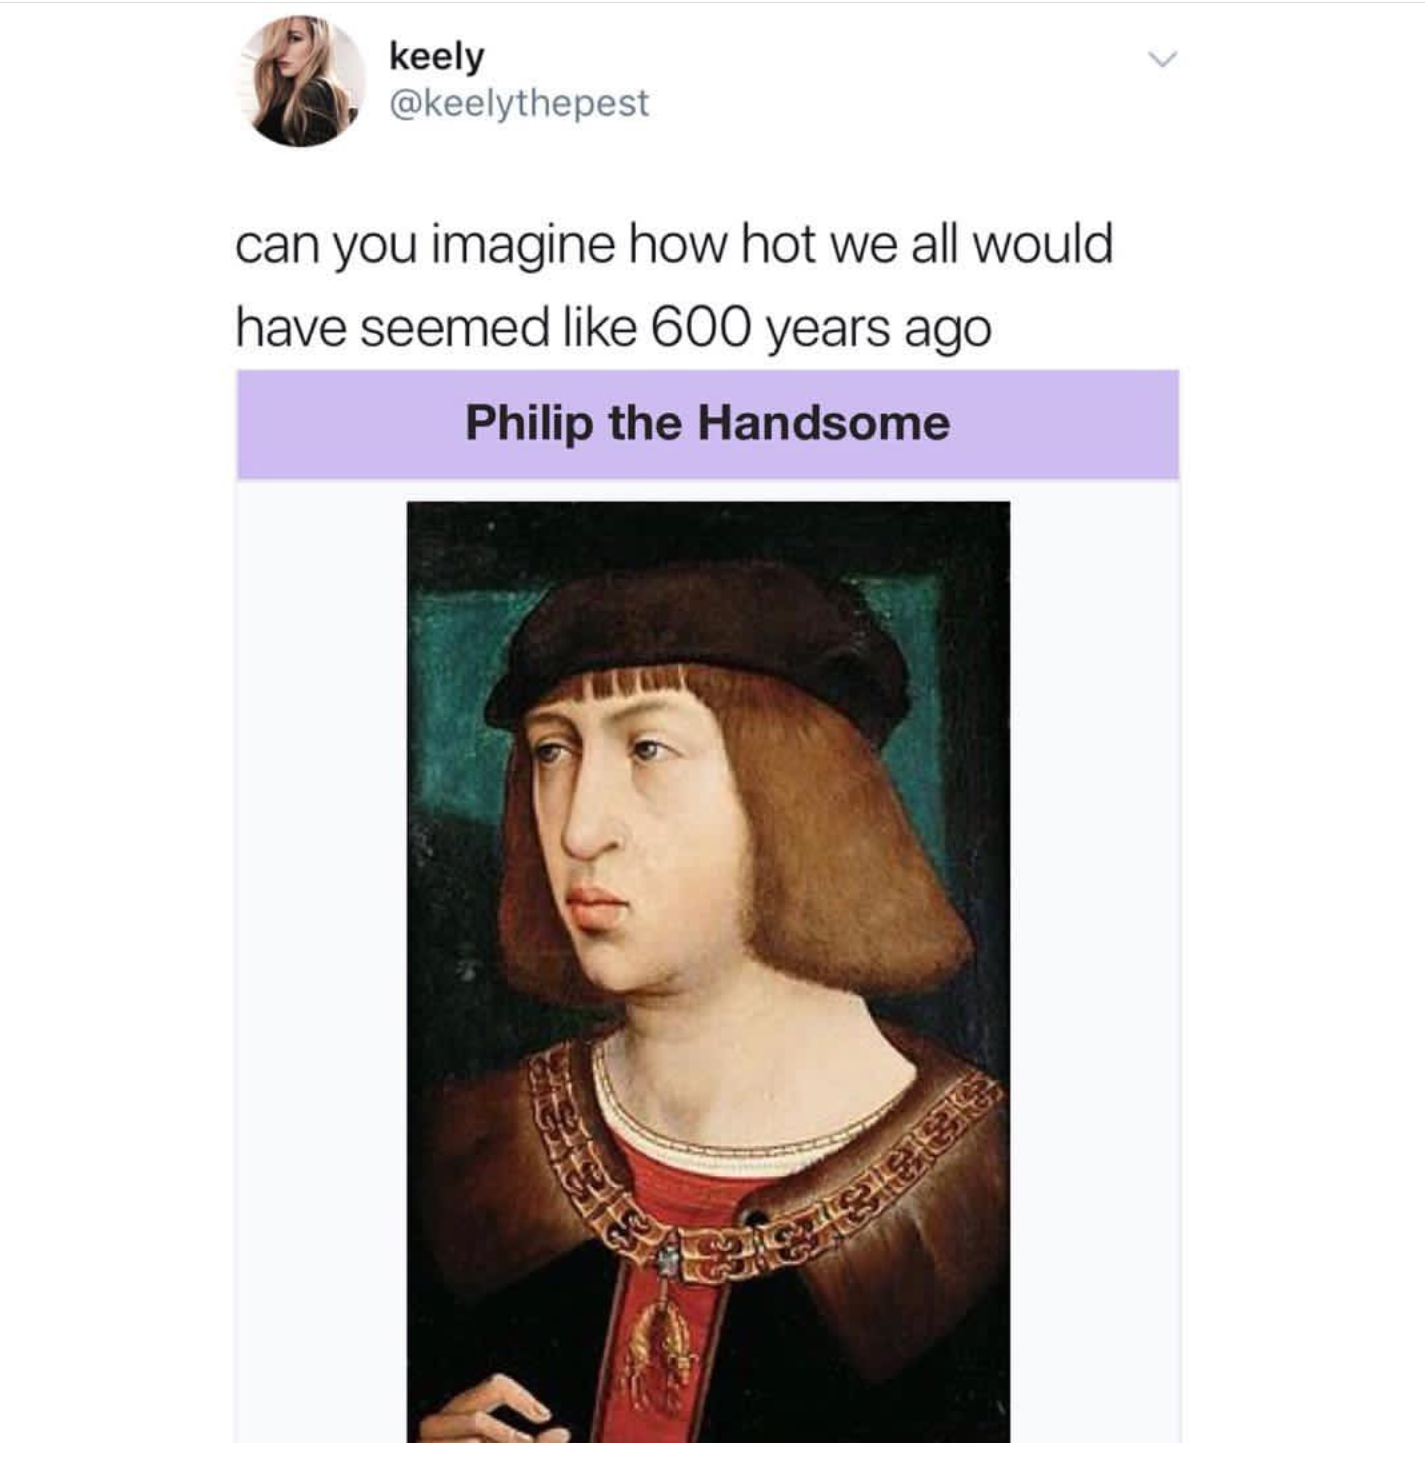 philip the handsome meme - keely can you imagine how hot we all would have seemed 600 years ago Philip the Handsome